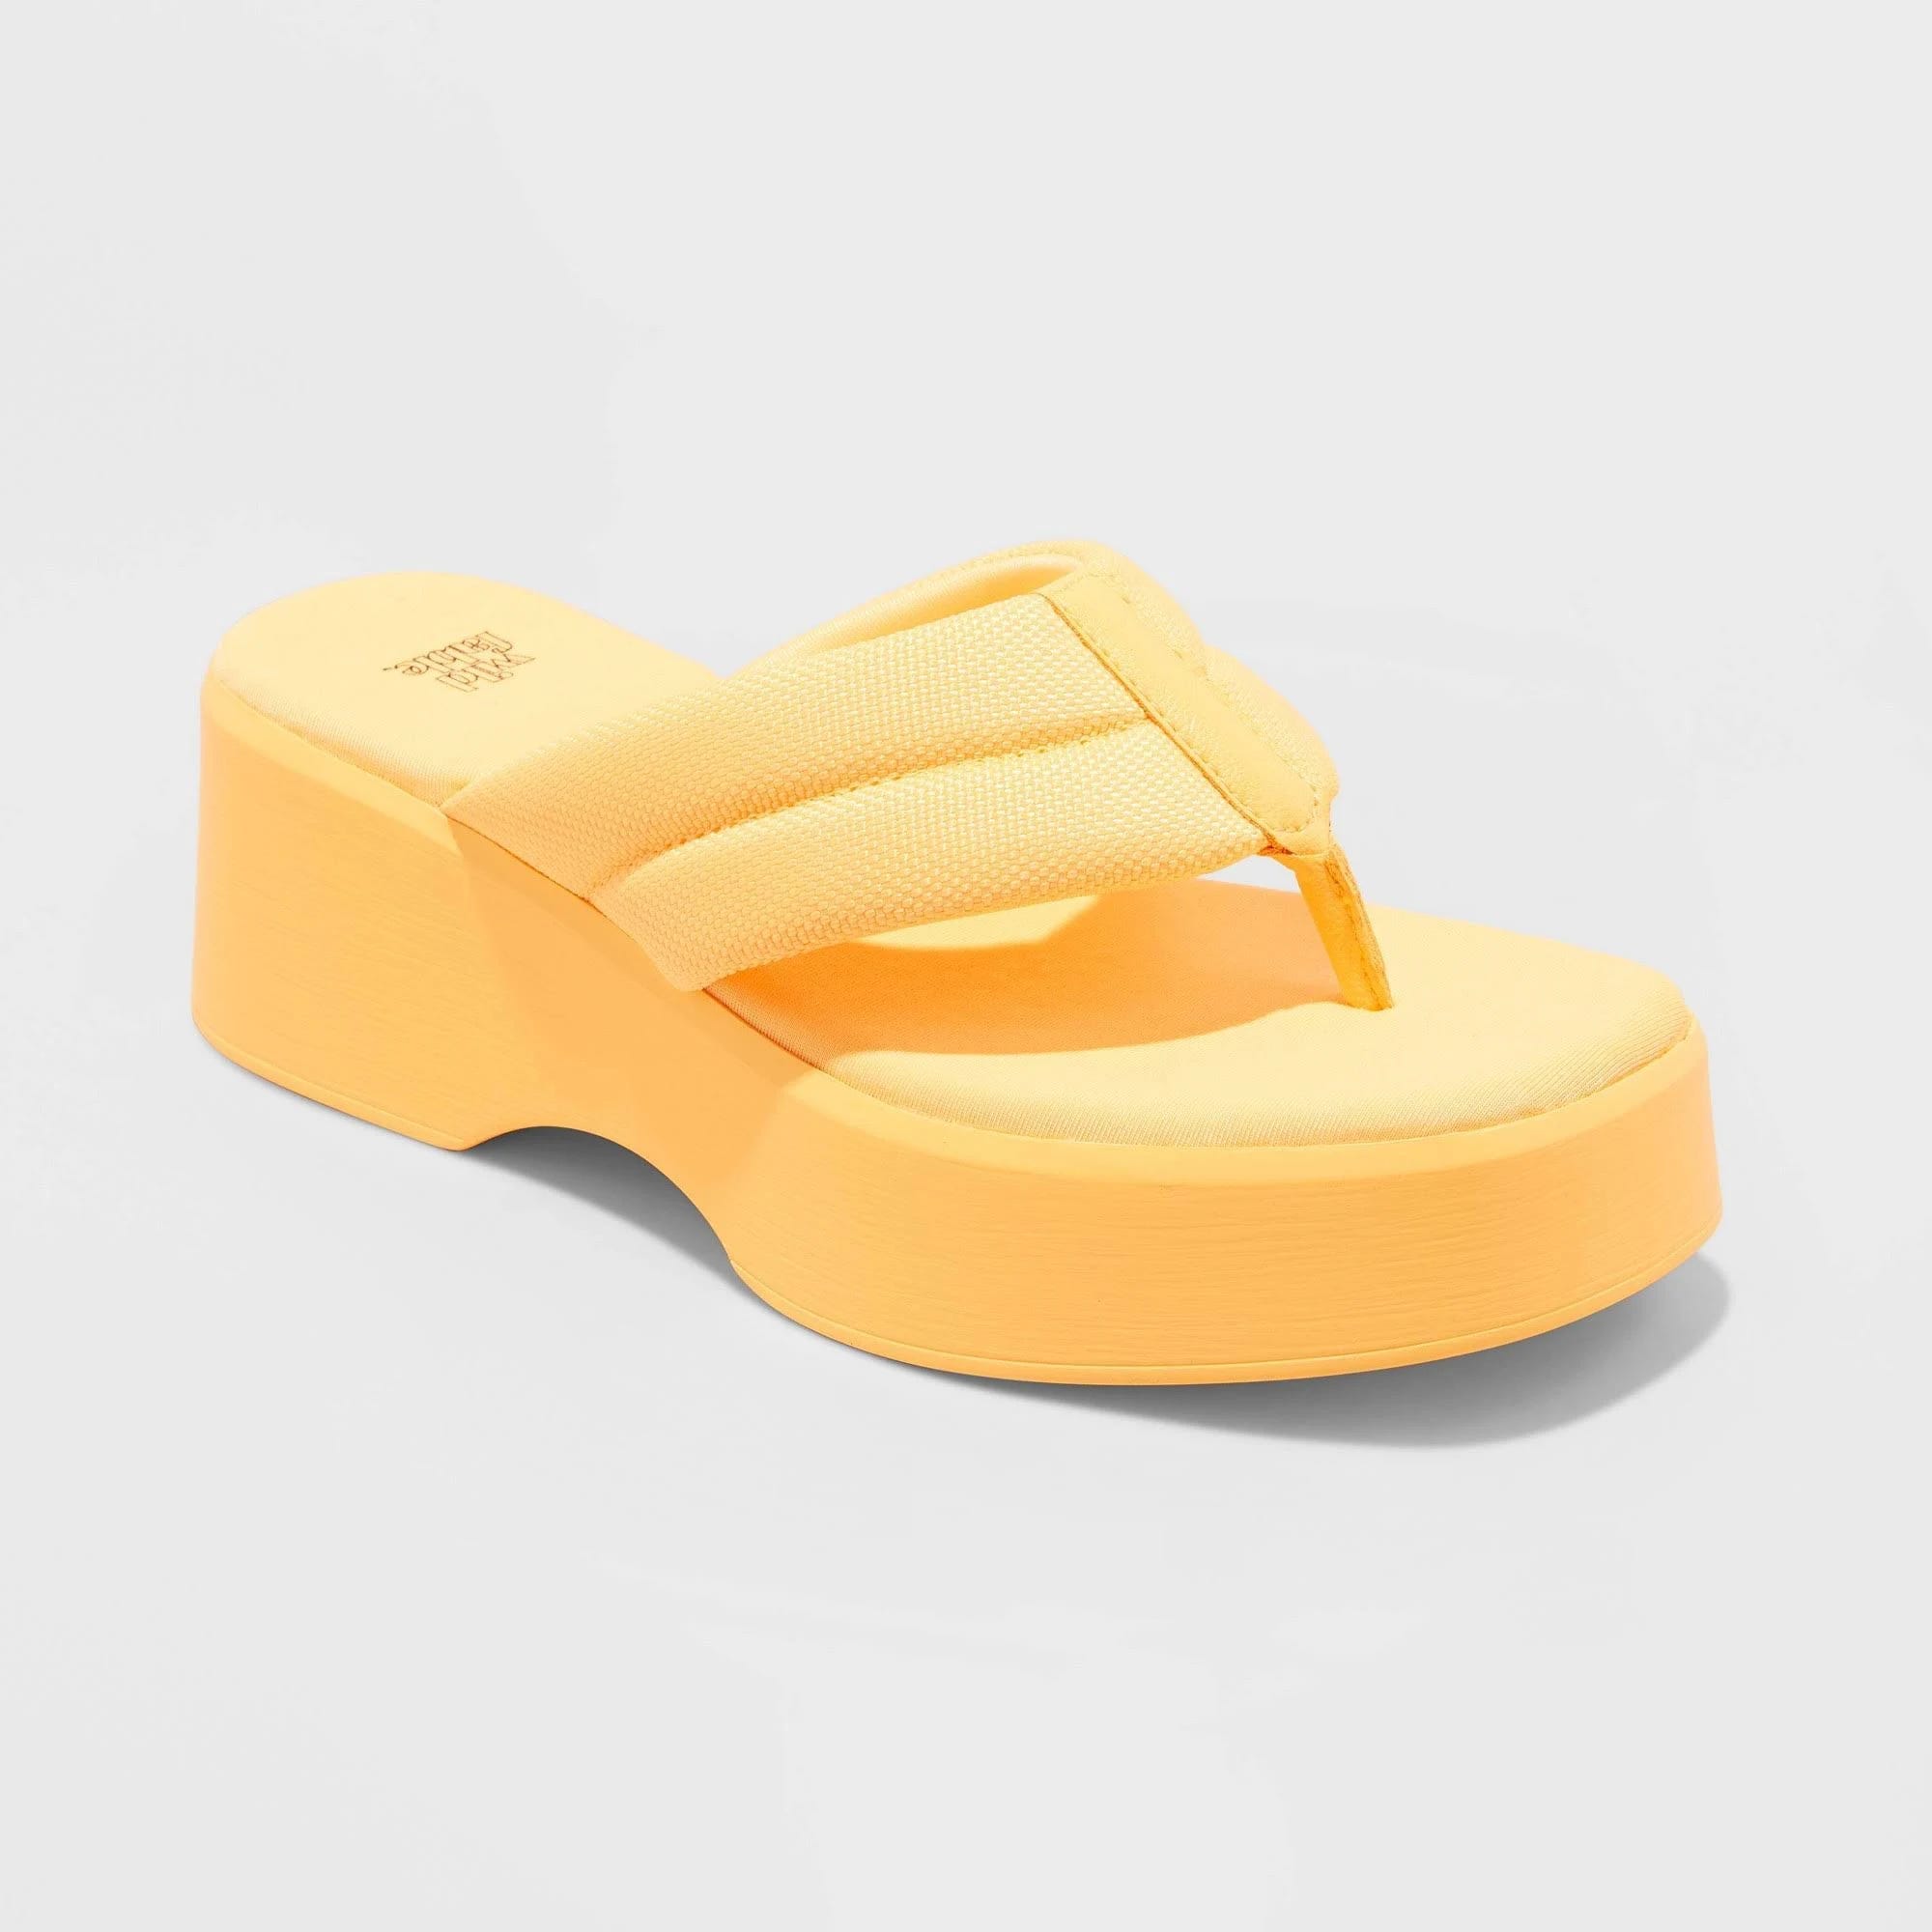 Wild Fable Orange Platform Sandals for Comfort and Style | Image